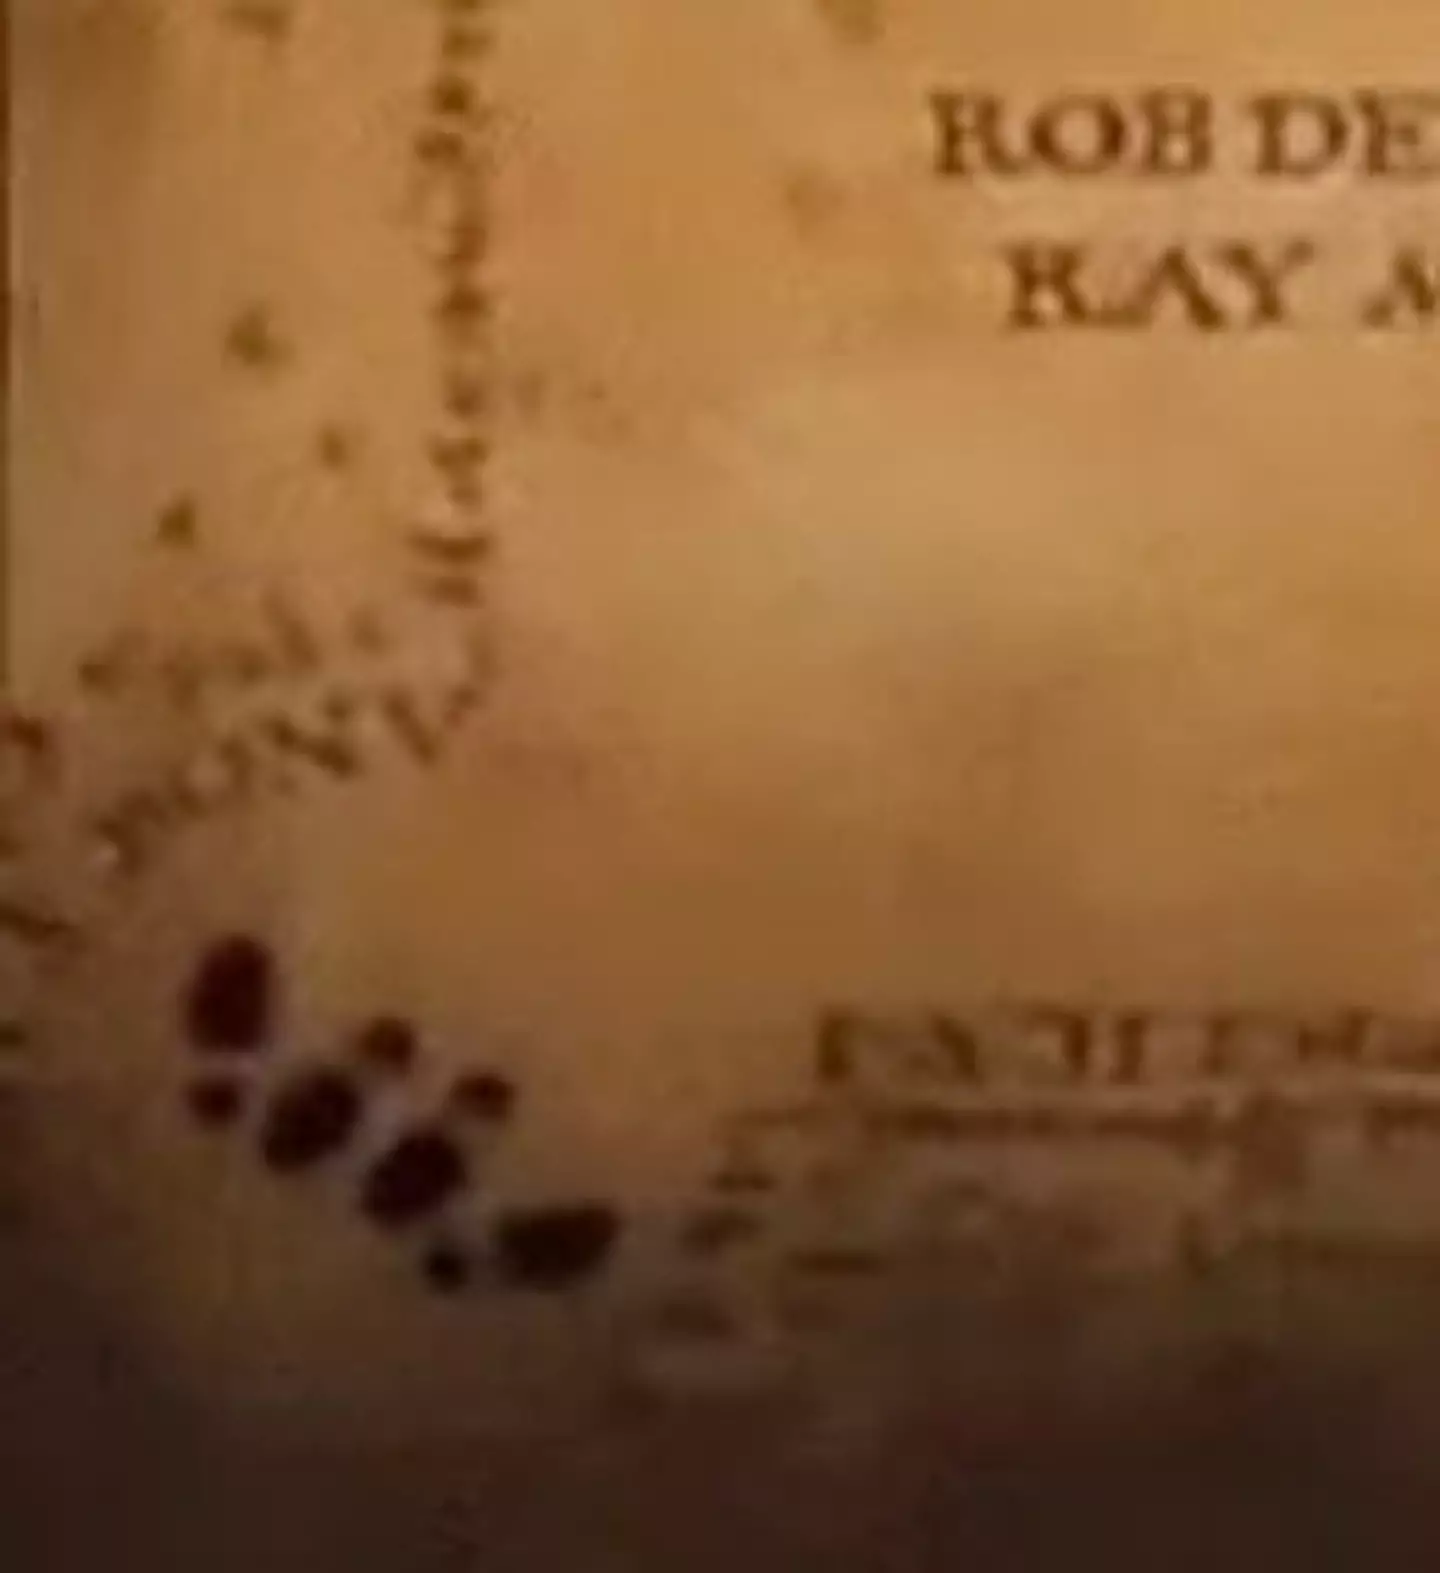 Harry Potter fans noticed this surprising detail in the credits sequence of the third film.